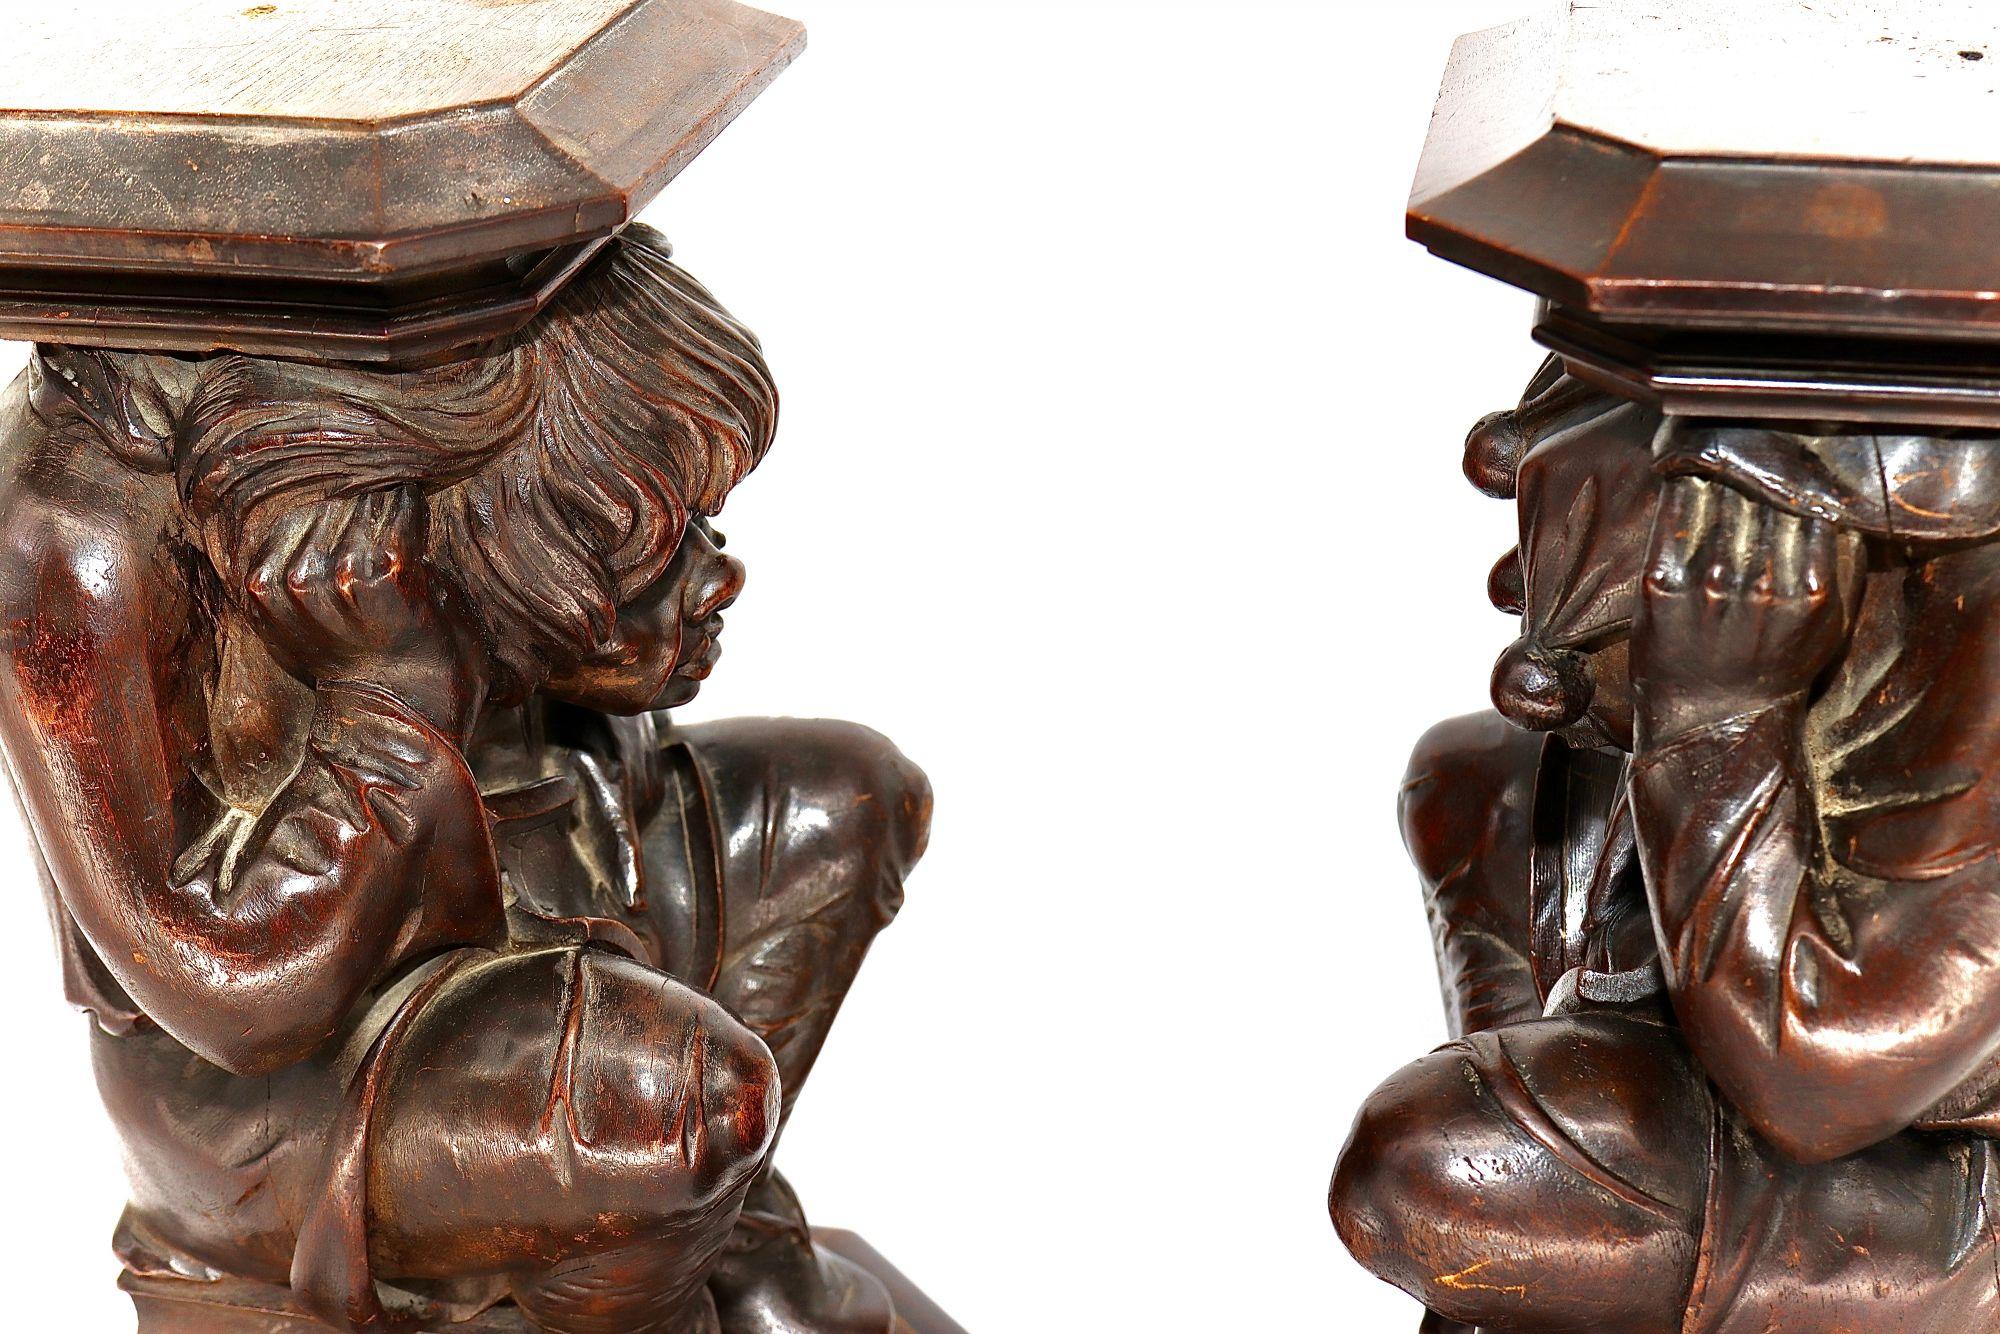 Monumental Pair of English Carved Walnut Wood Figures of Court Jesters, 18th C For Sale 3